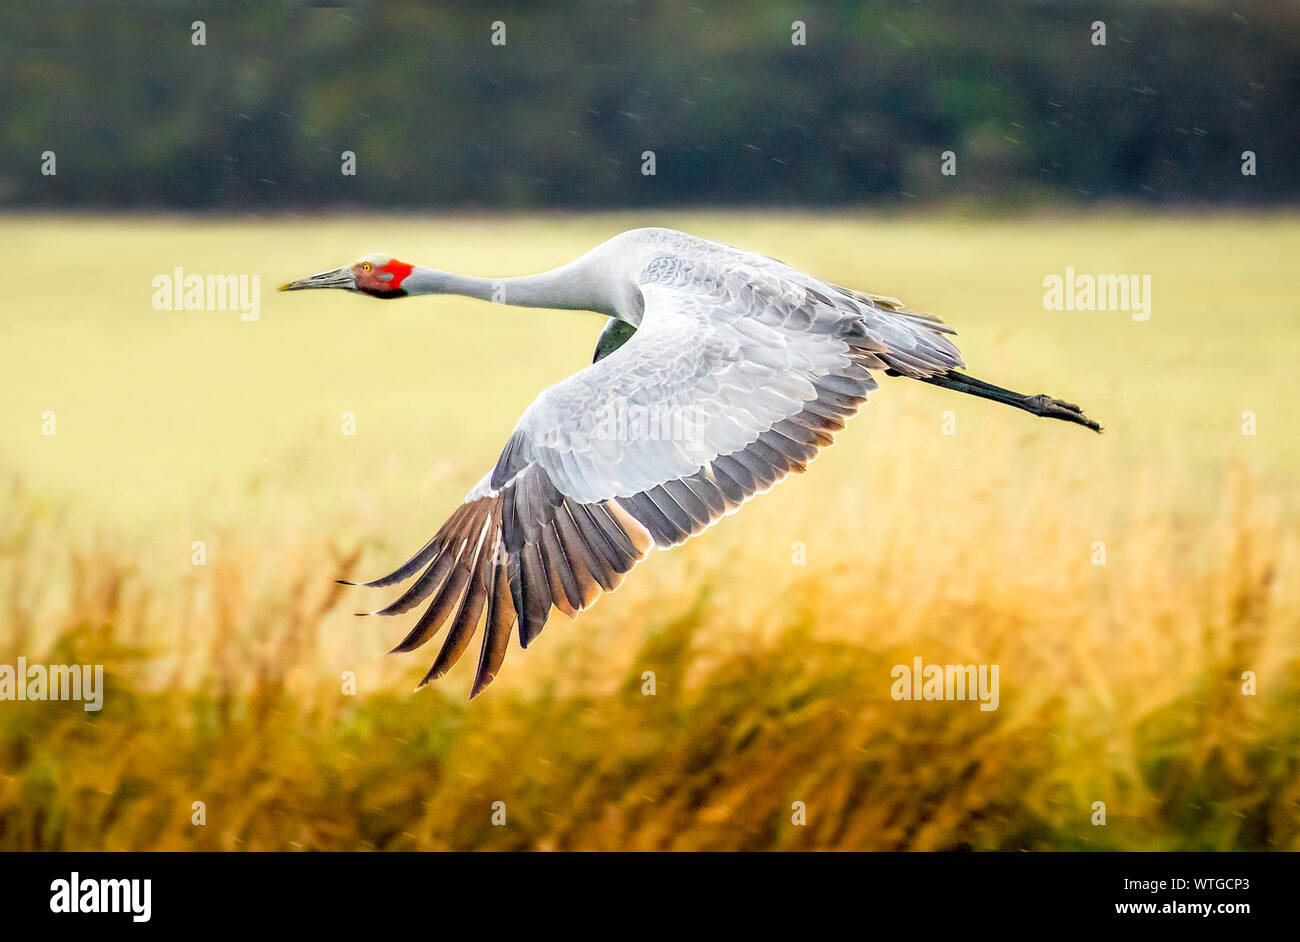 View Of Eurasian Crane Flying With Spread Wings Stock Photo